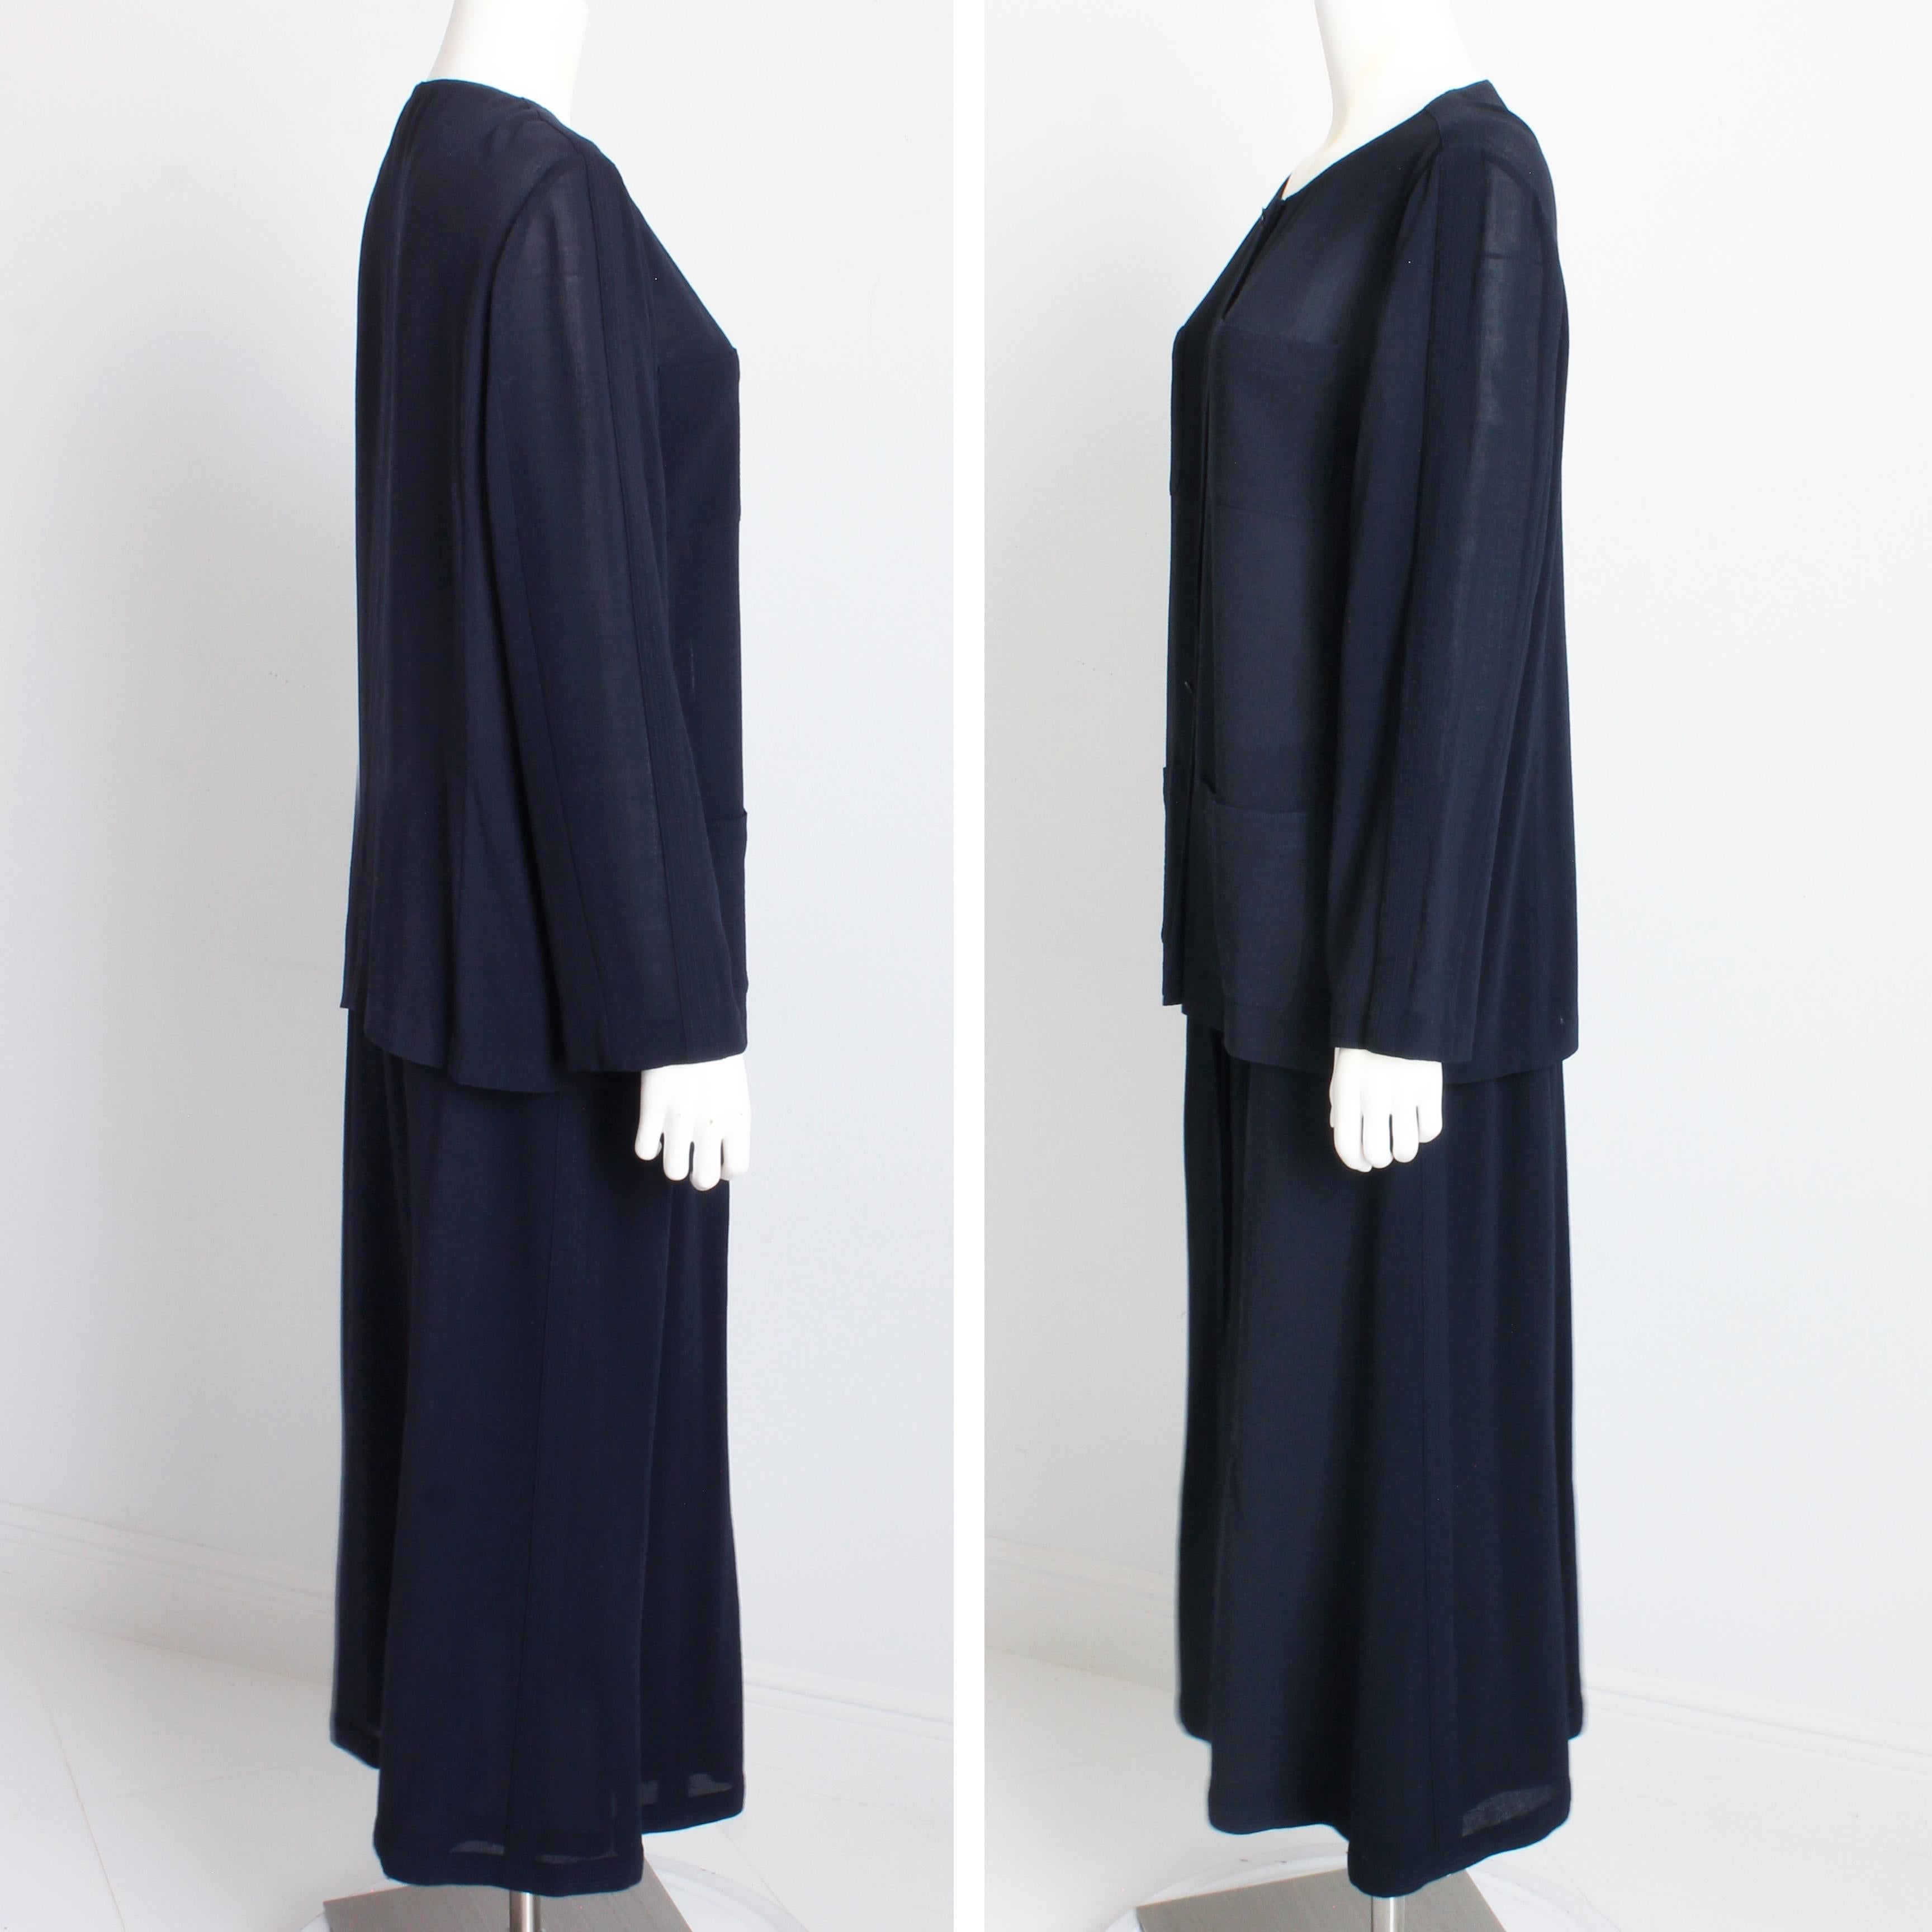 Chanel Jacket + Skirt Suit 2pc Sheer Wool Crepe Button Front Navy Blue 99P Sz 44 For Sale 3